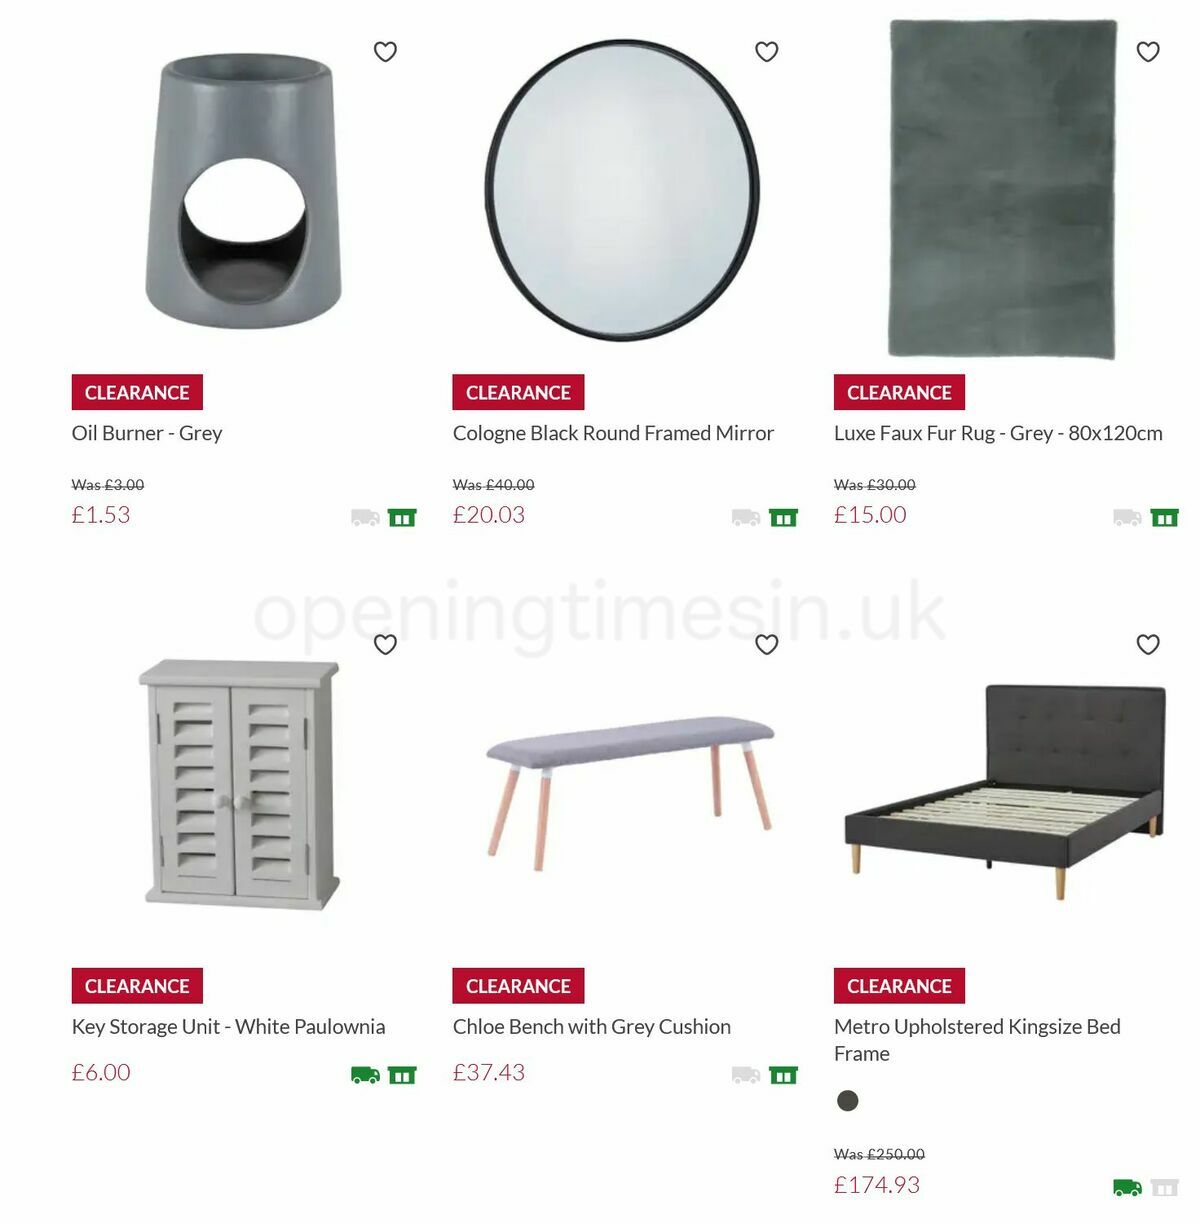 Homebase Offers from 16 July